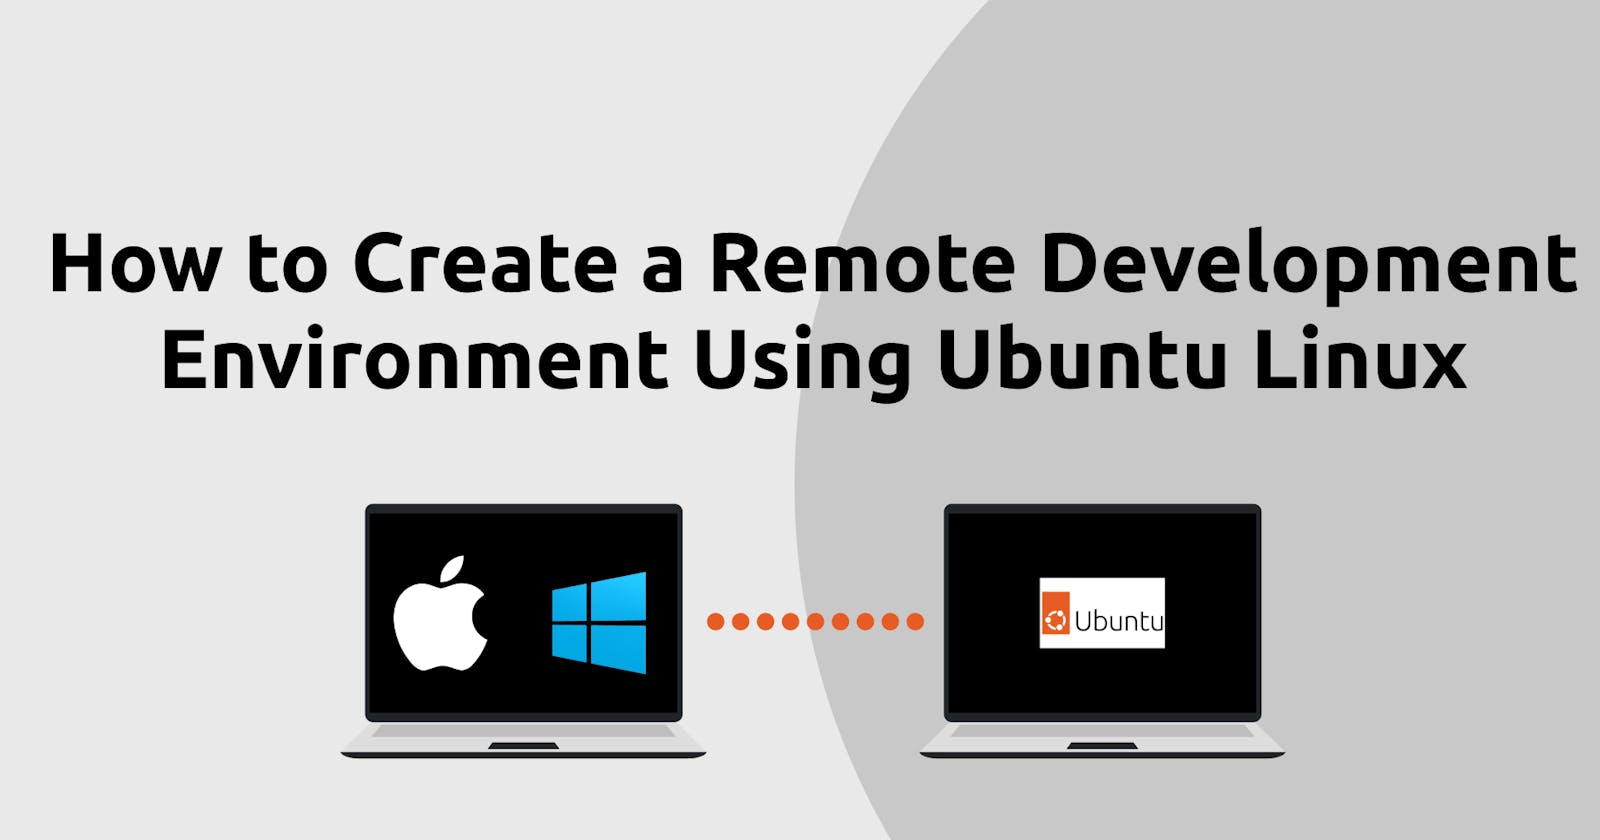 How to Create a Remote Development Environment Using Ubuntu Linux